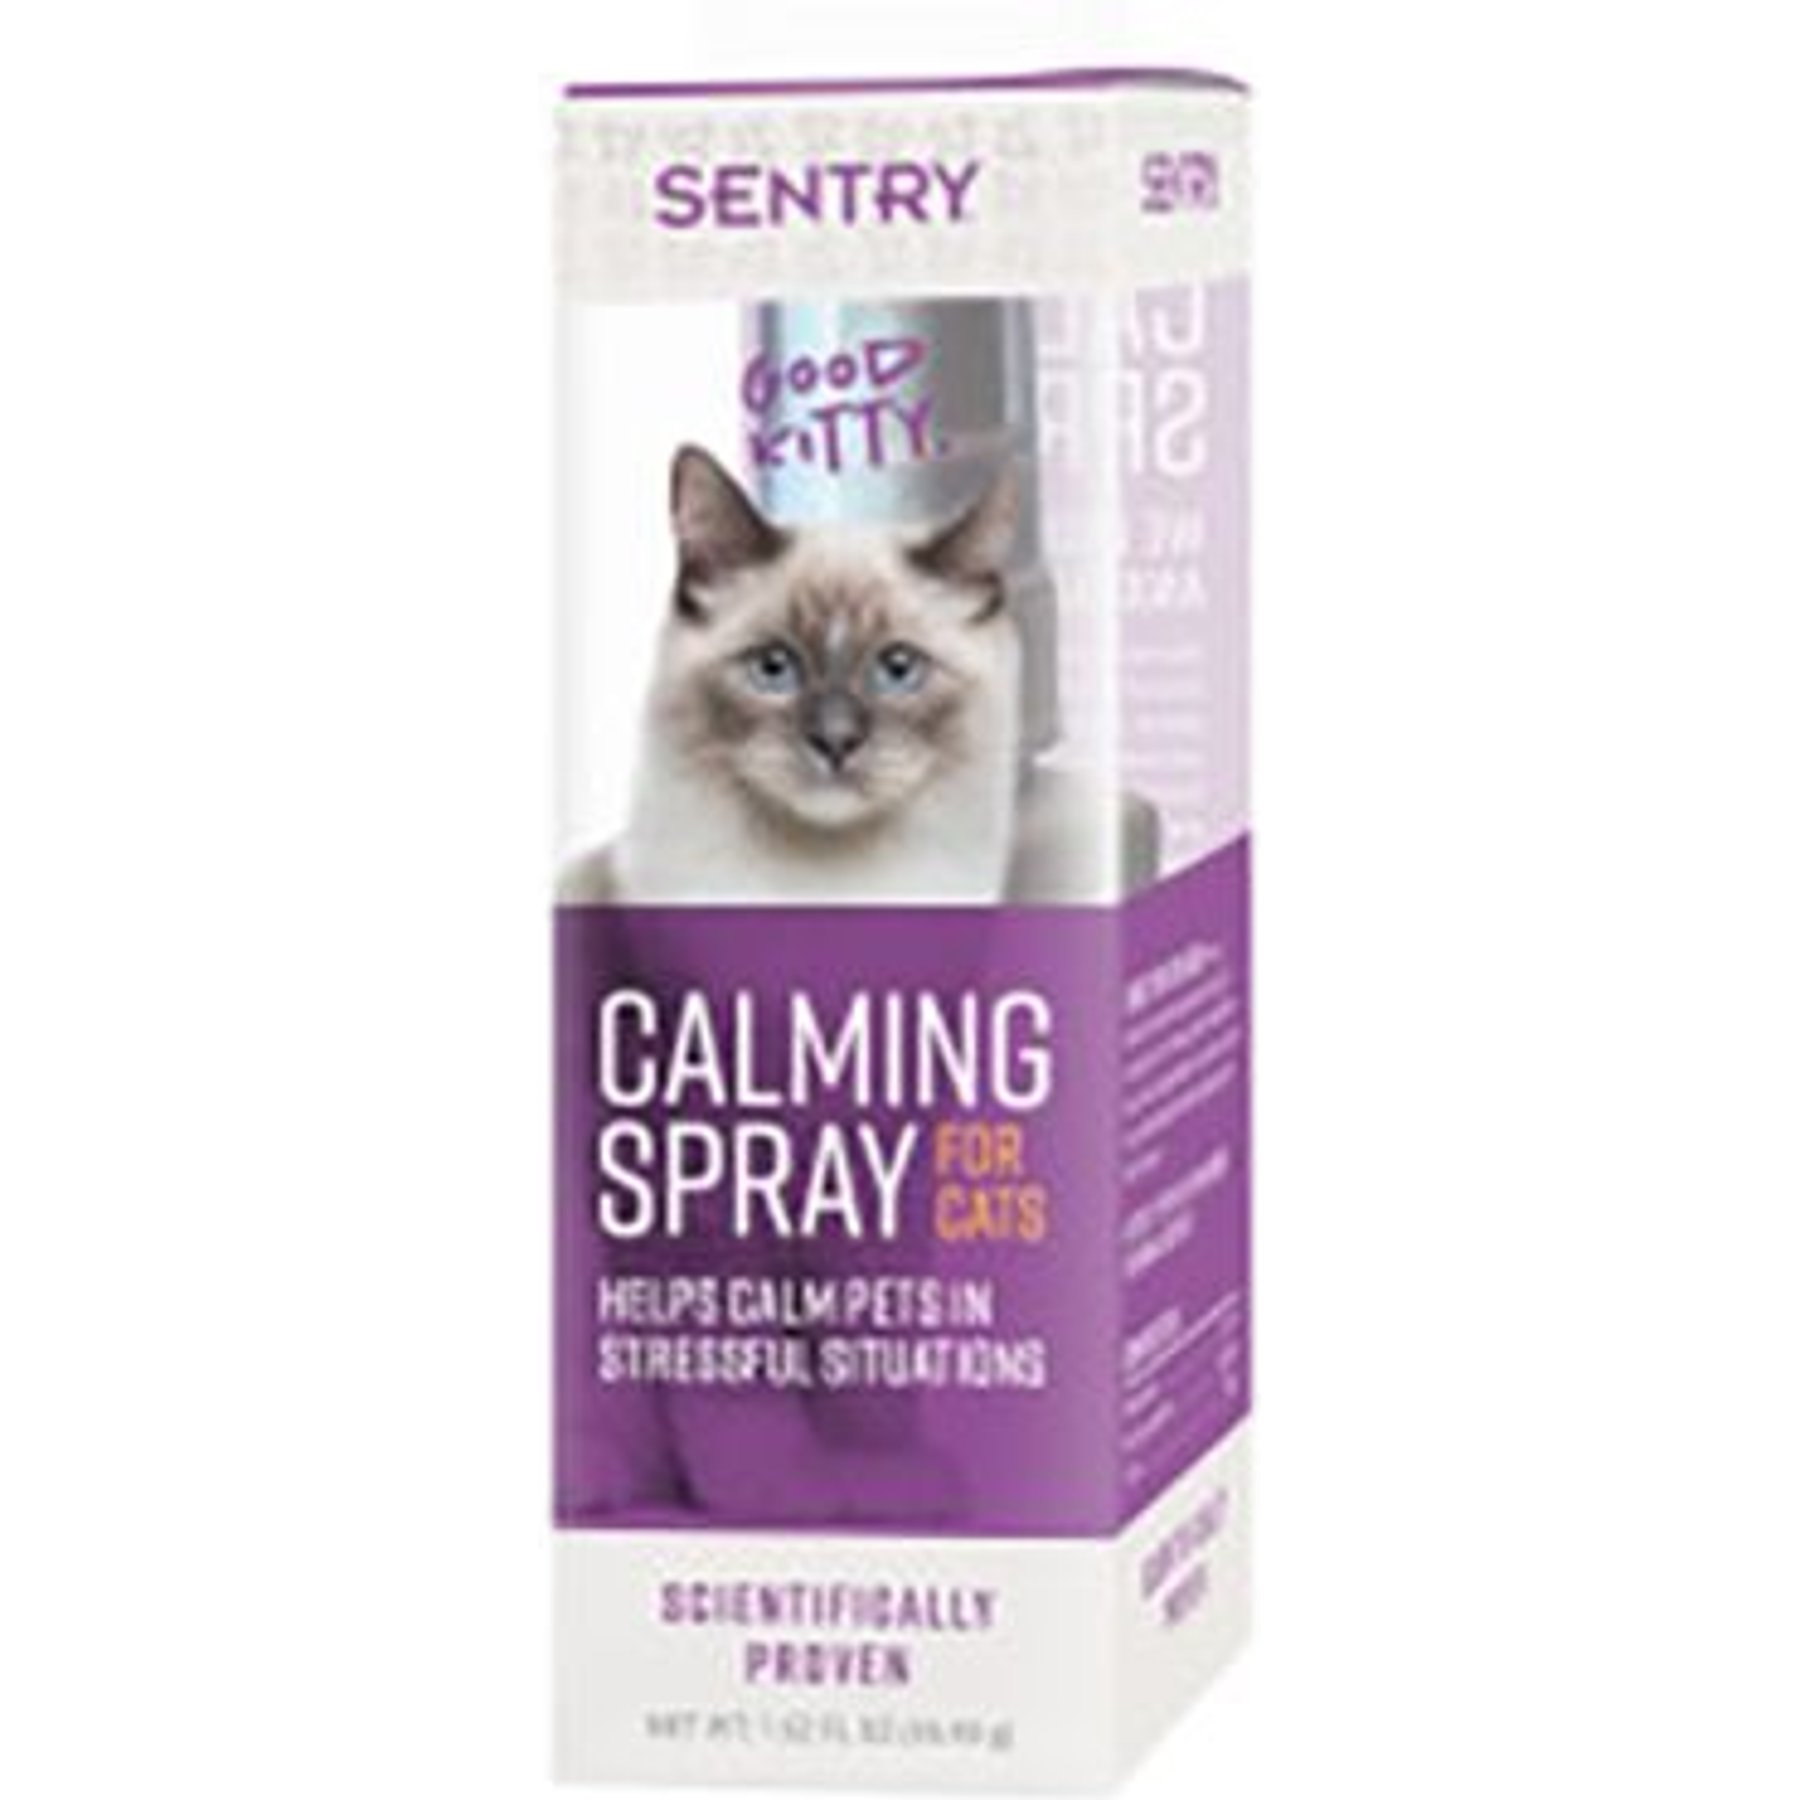 SENTRY PET Care SENTRY Calming Toy for Dogs, One Calming Drop Application  Included